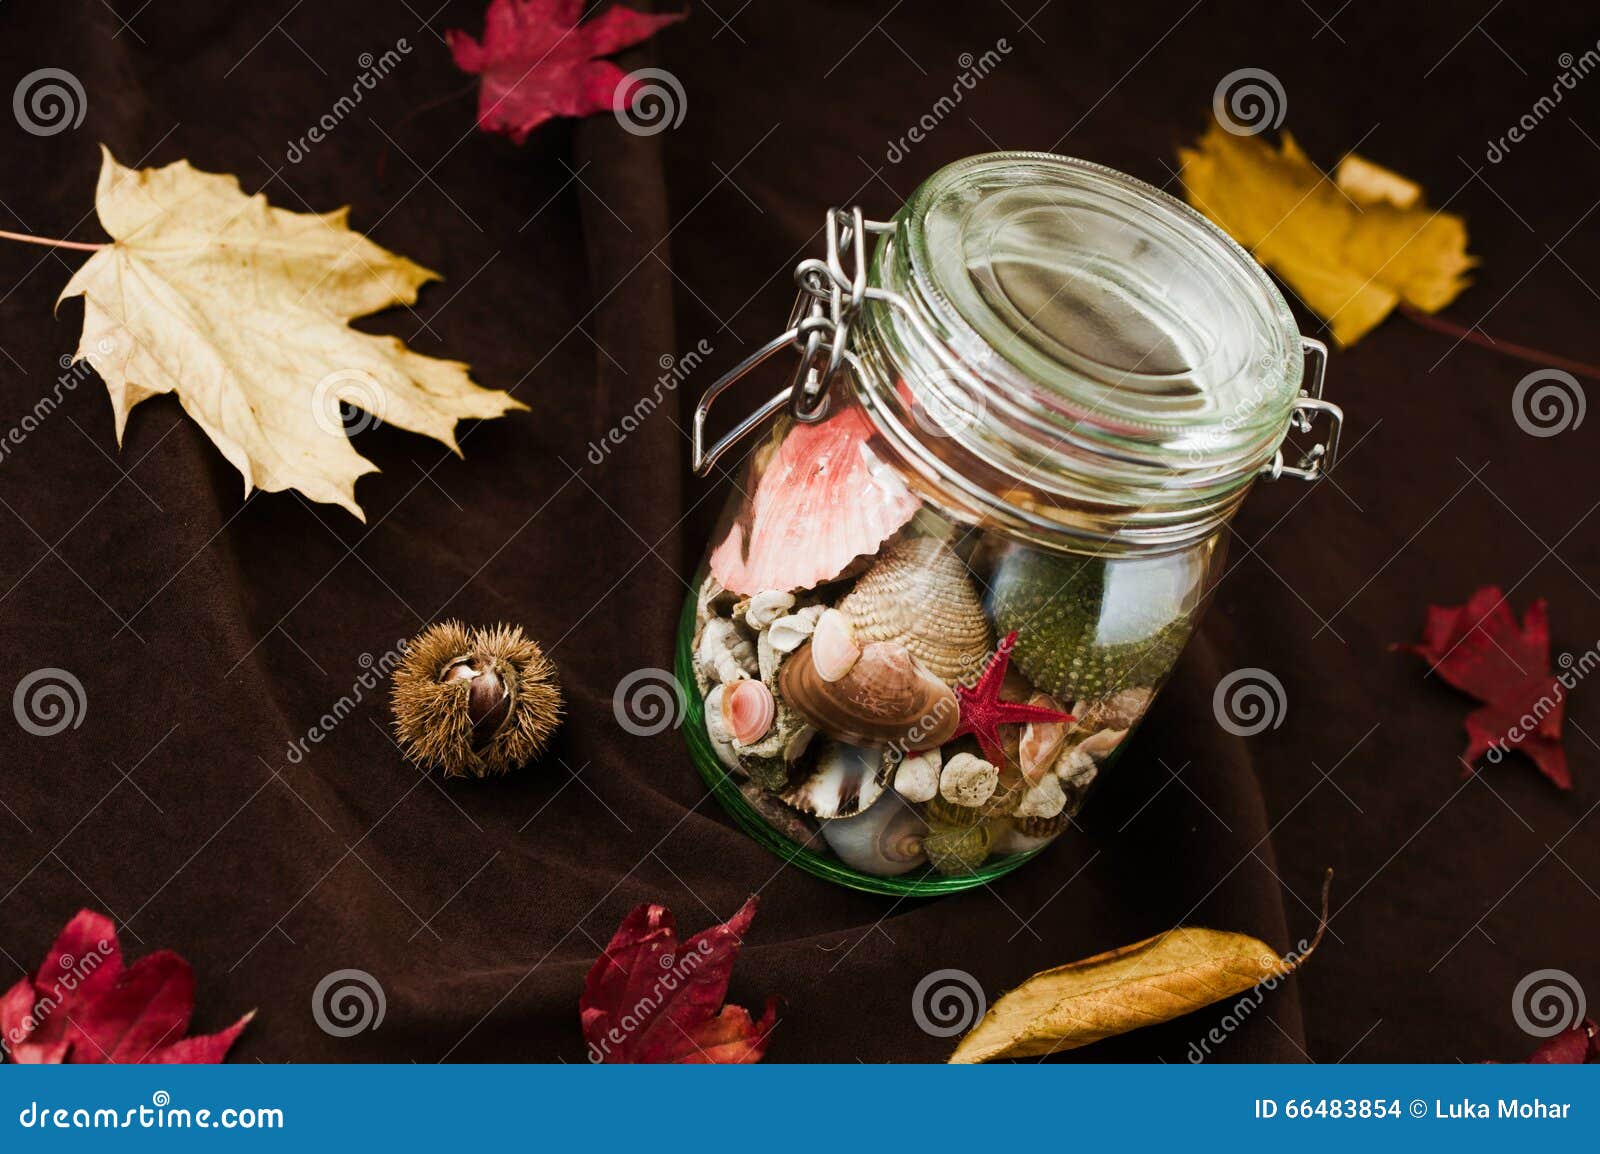 concept of changing seasons summer in jar in autumn setting